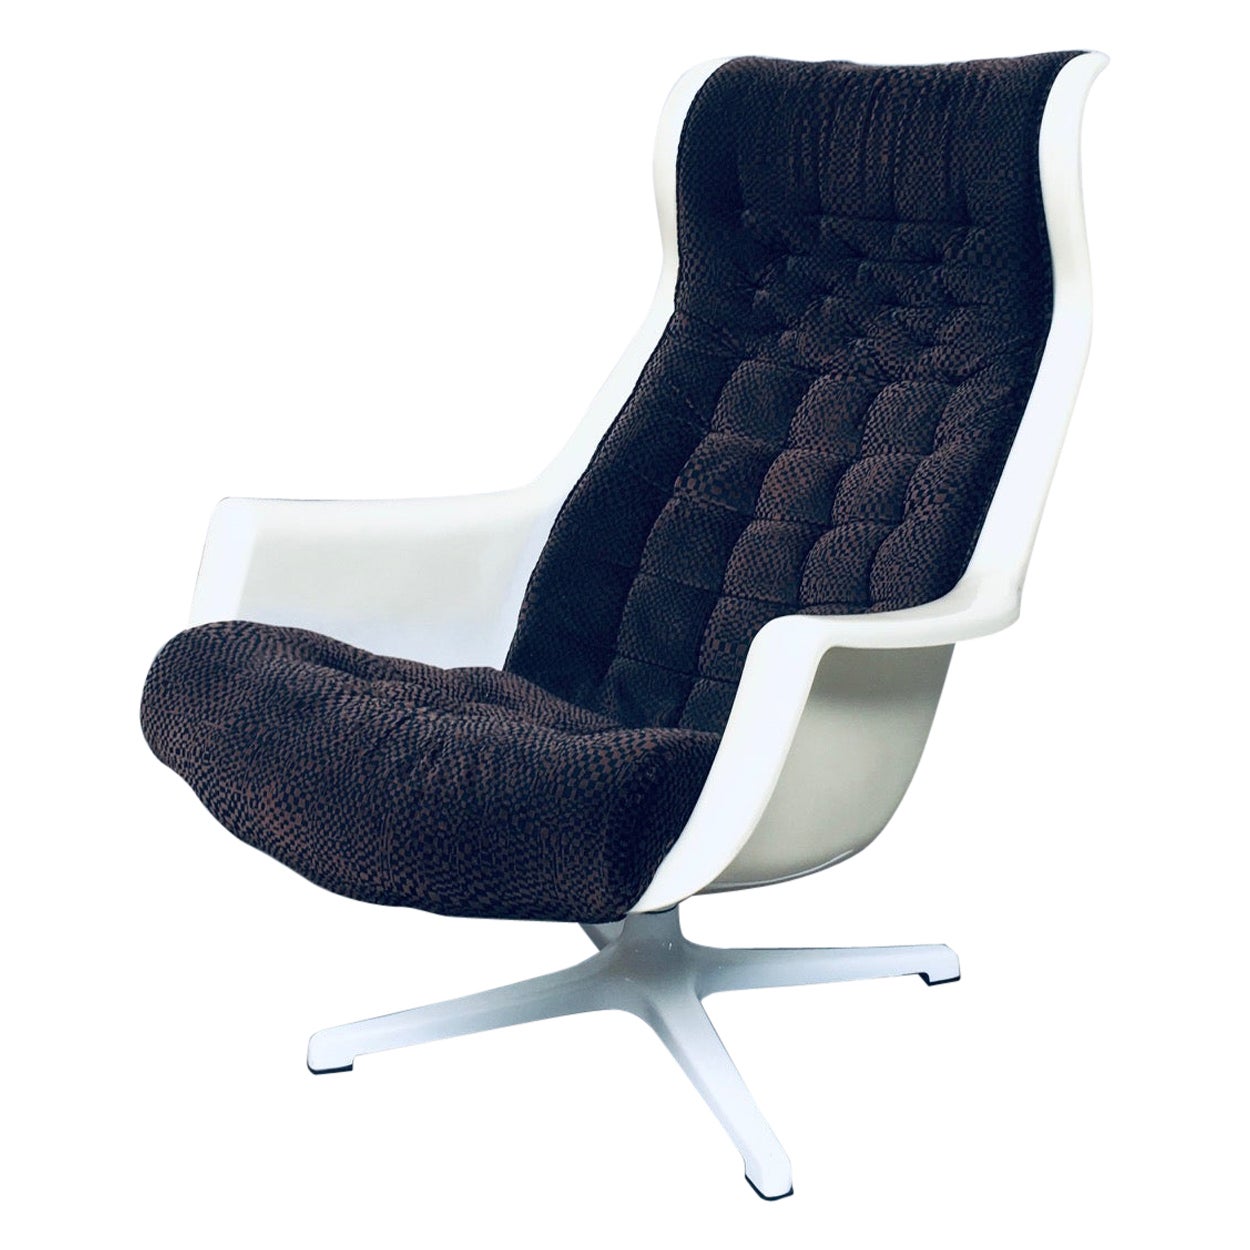 Midcentury Modern 'Galaxy' Lounge Chair by Alf Svensson for Dux, Denmark 1960's